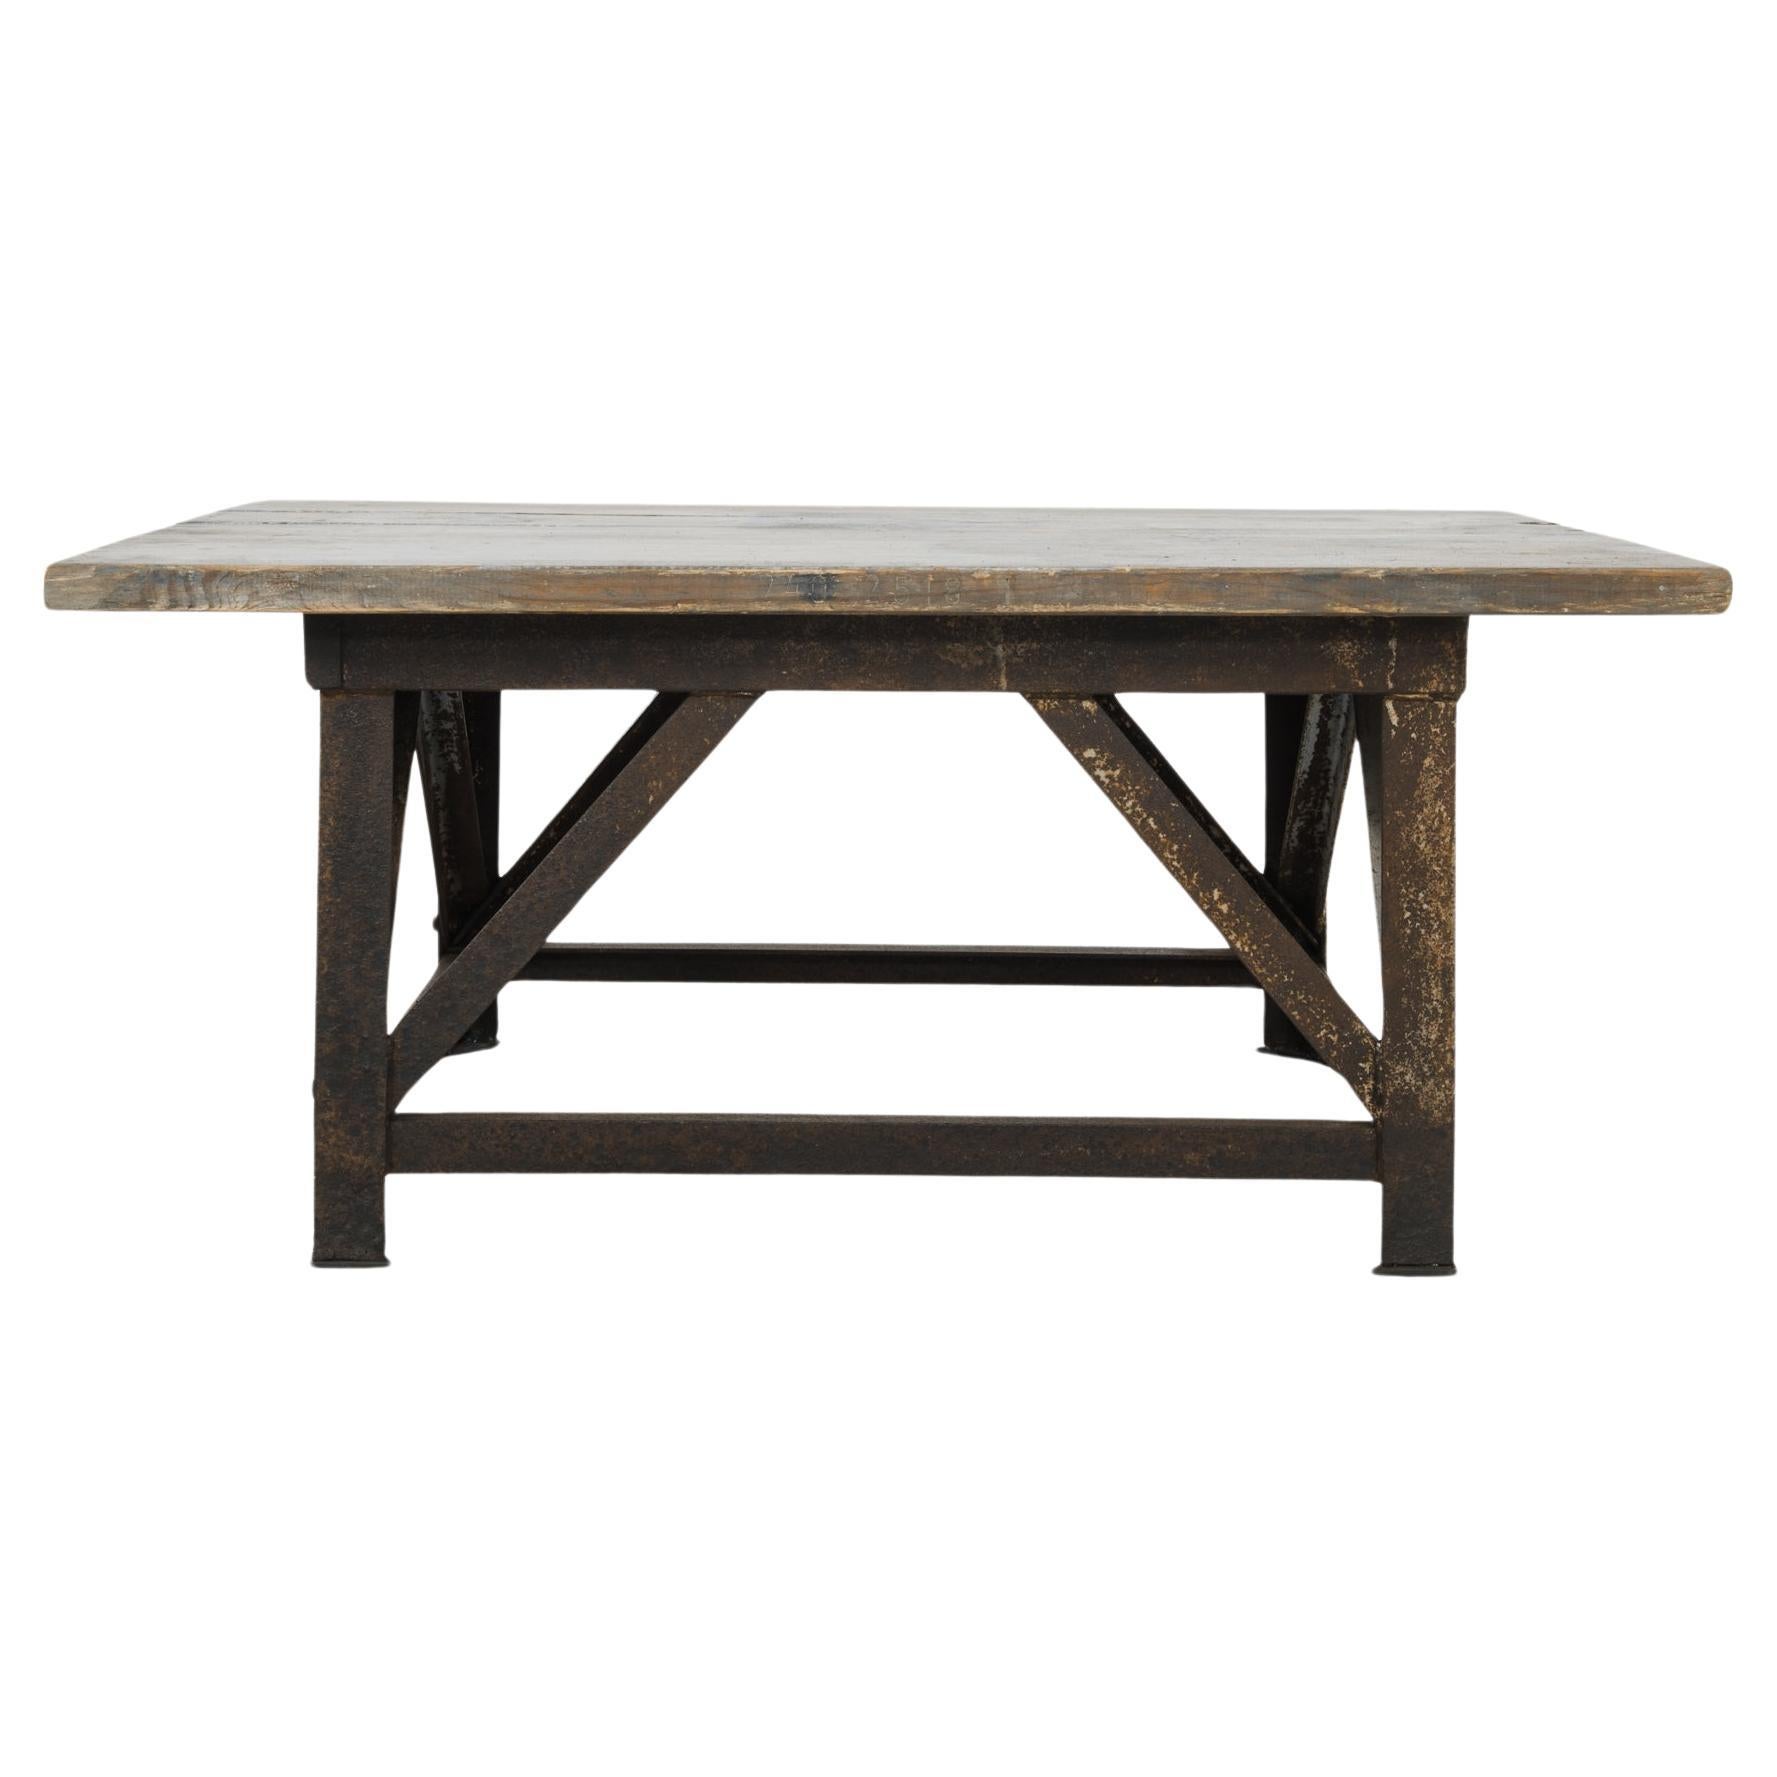 1950s Czech Iron Table with Wooden Top